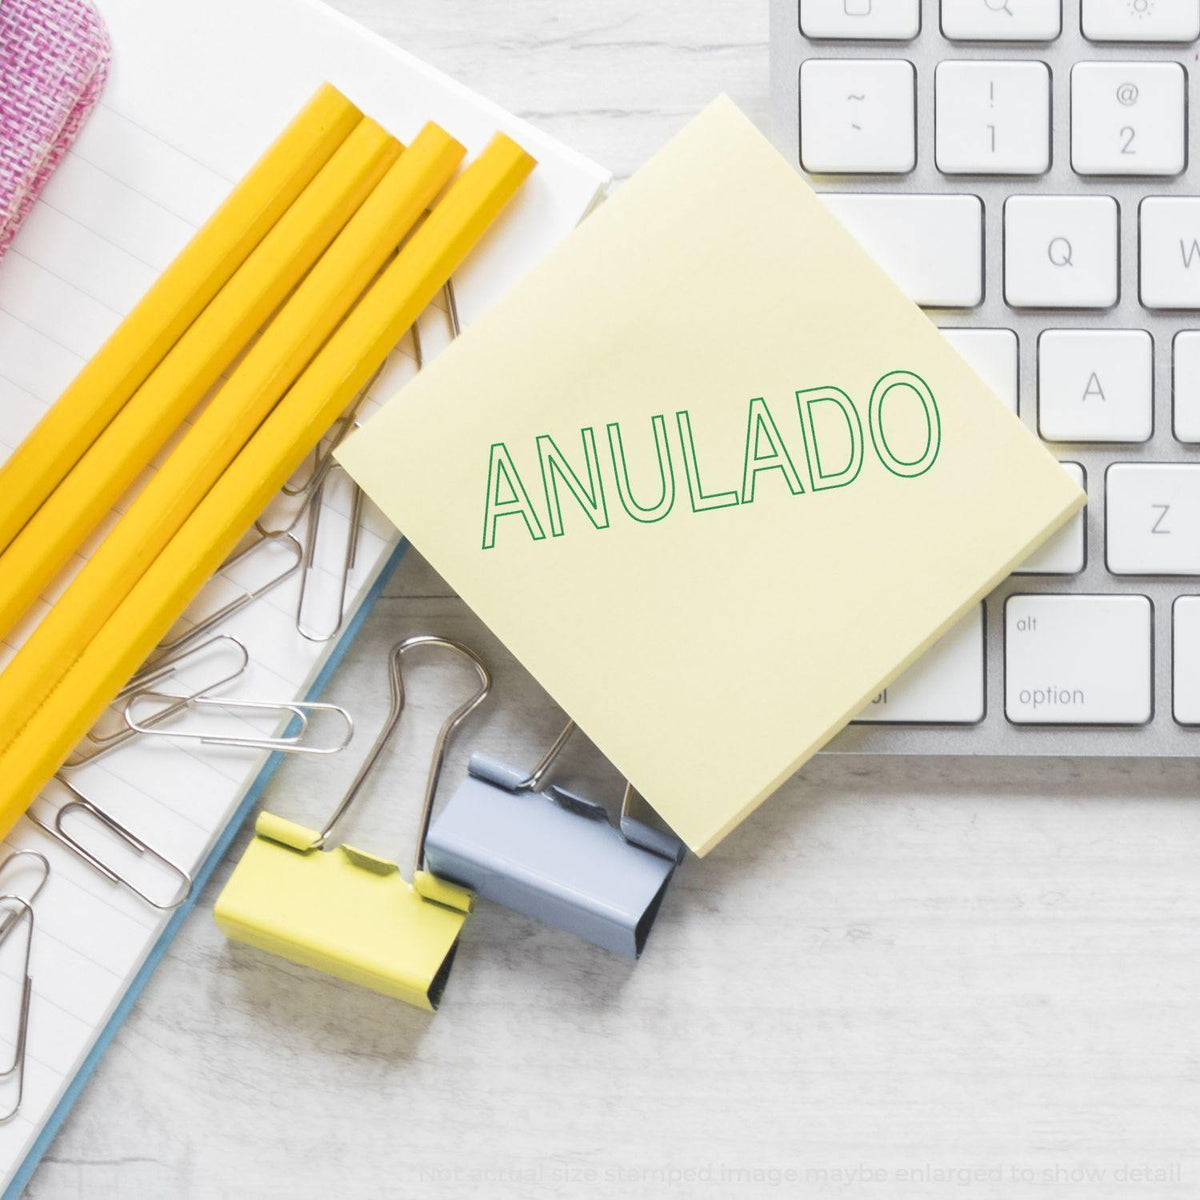 In Use Large Pre-Inked Outline Anulado Stamp Image